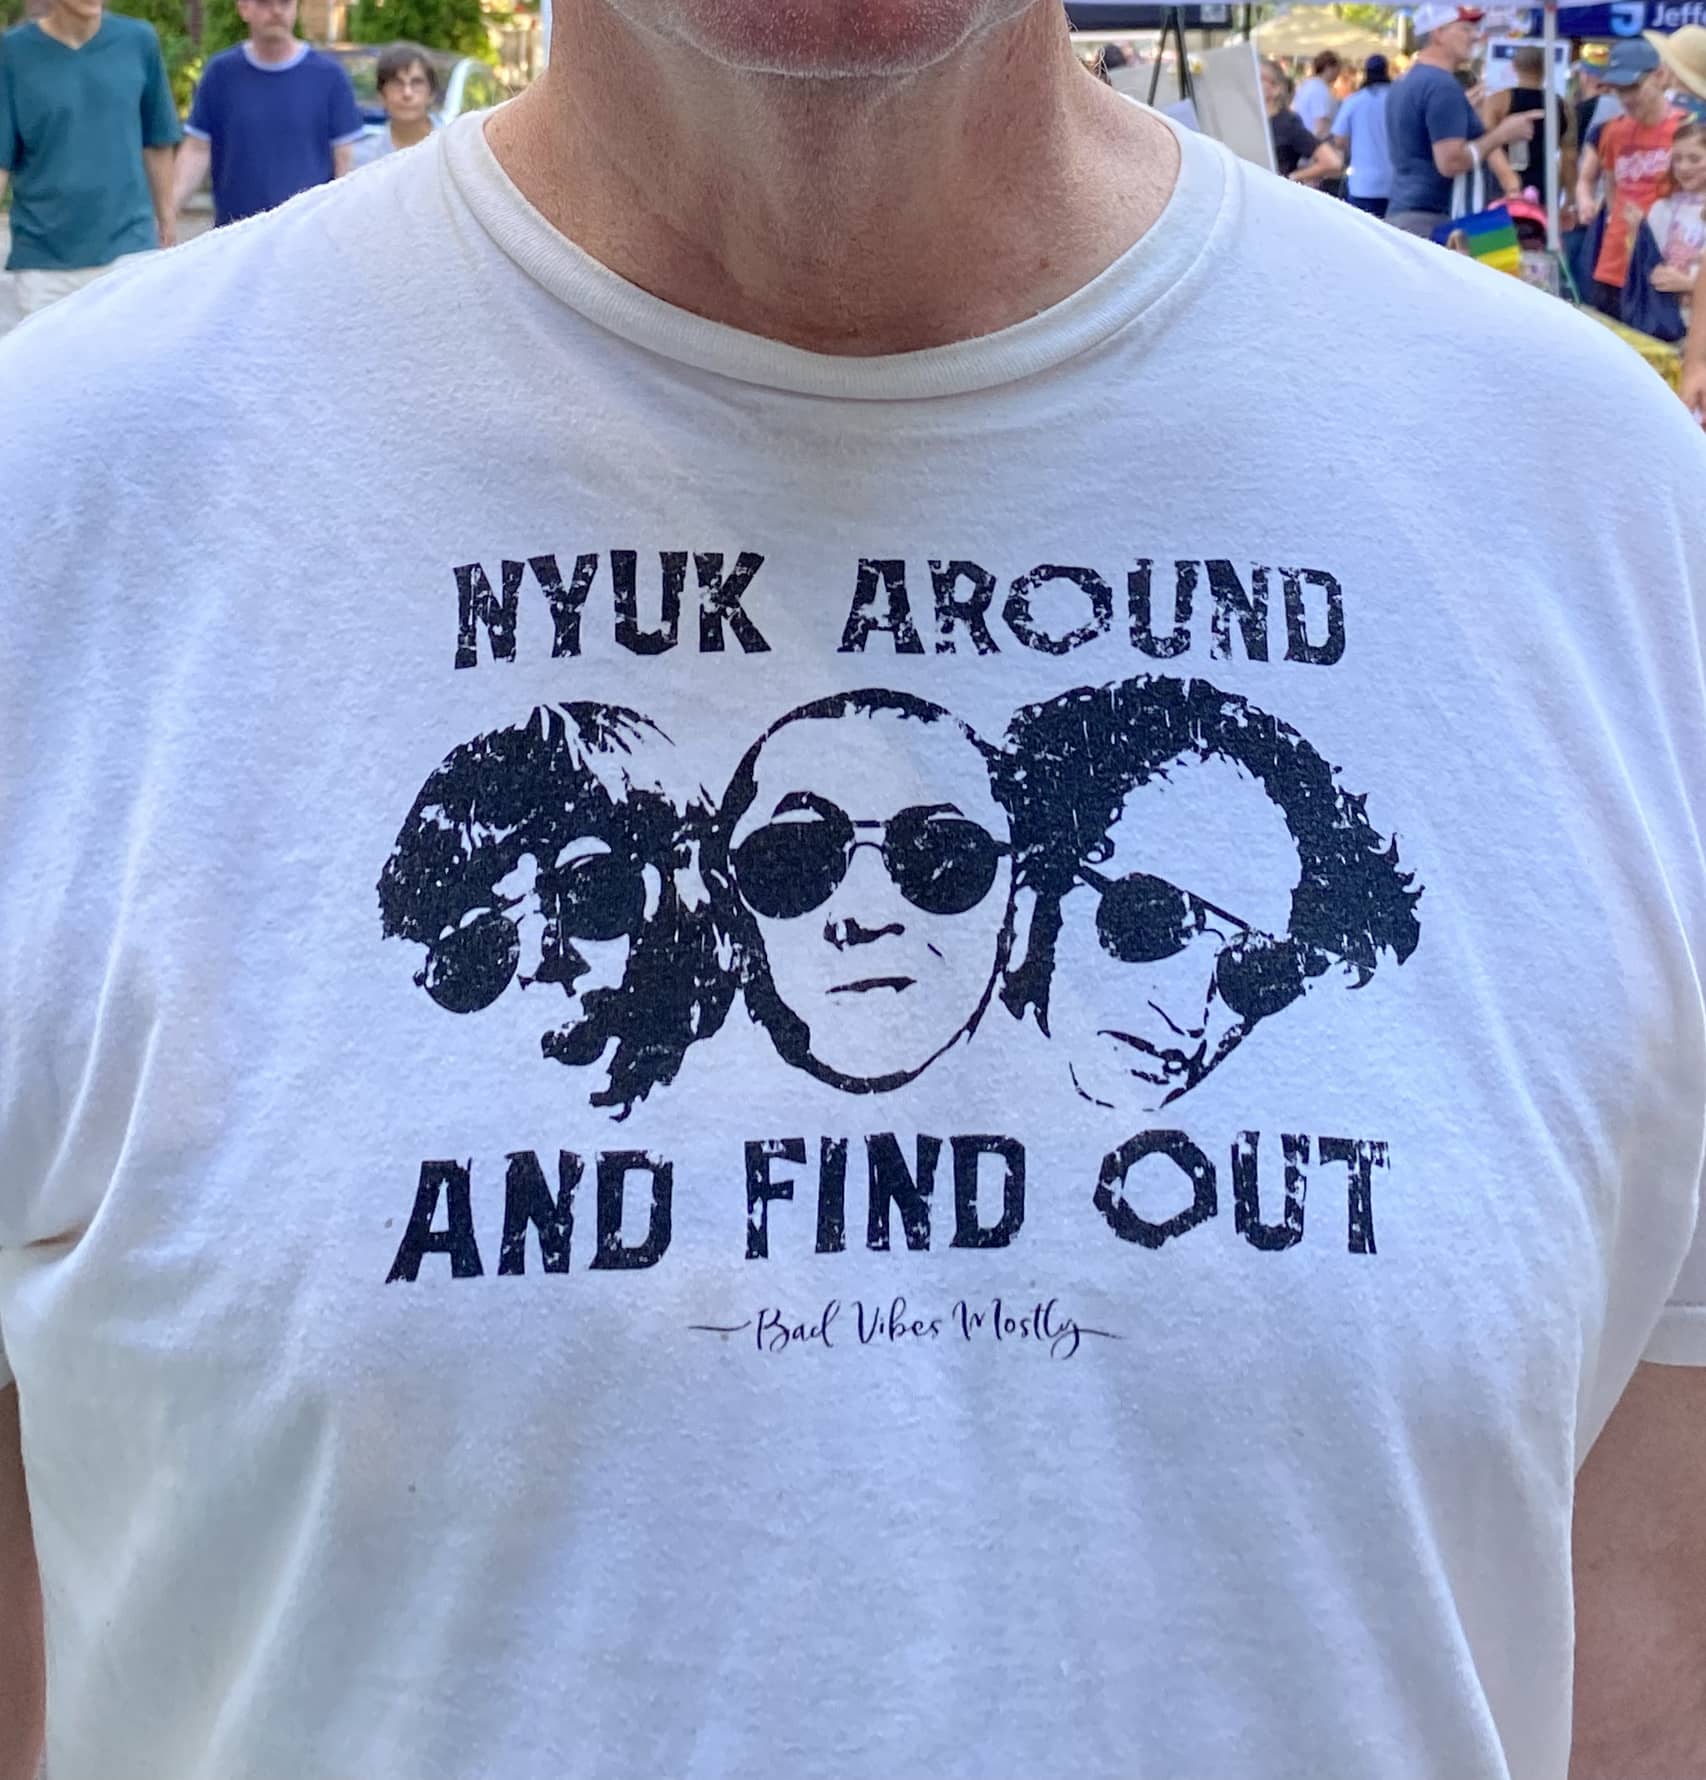 Nyuk Around and Find Out t-shirt for your favorite stooge. Printed by Bad Vibes Mostly in Collingswood, NJ